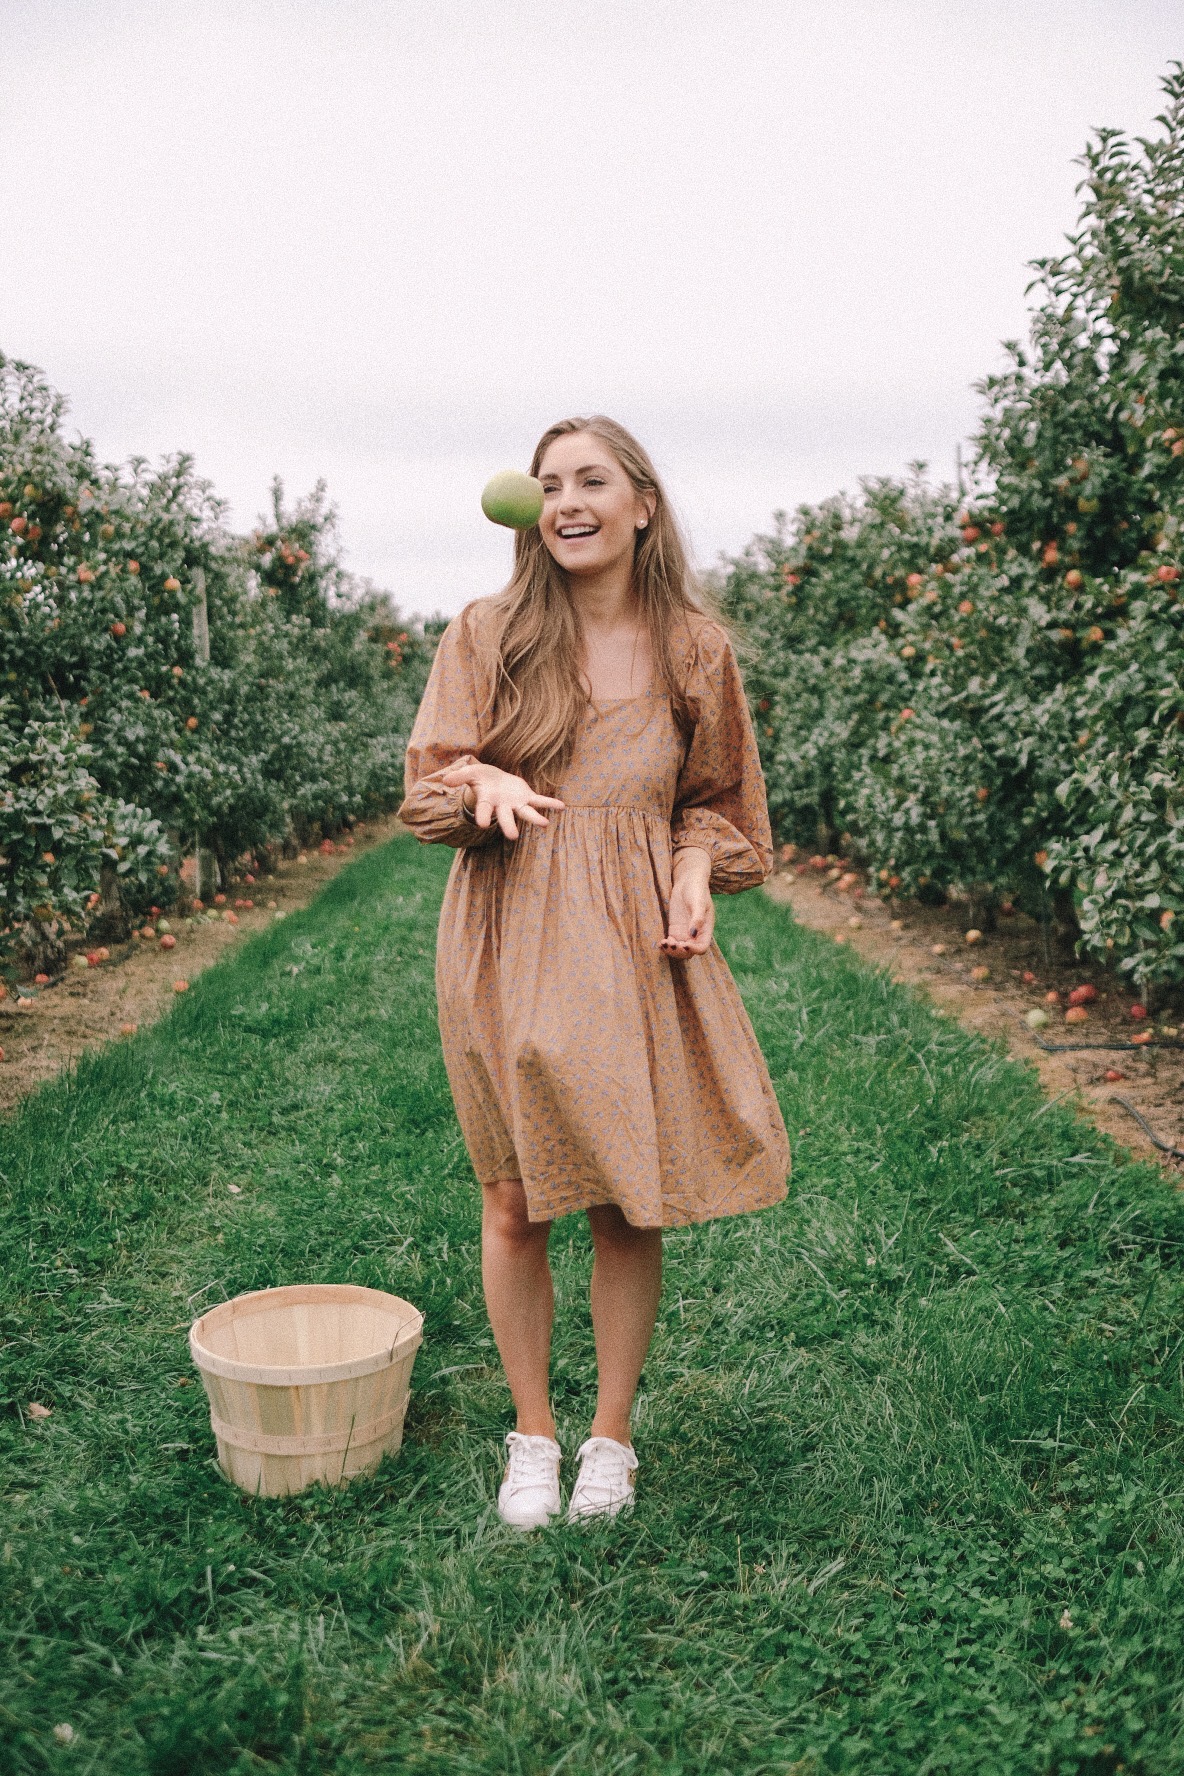 Fall dress and sneakers | Miss Madeline Rose